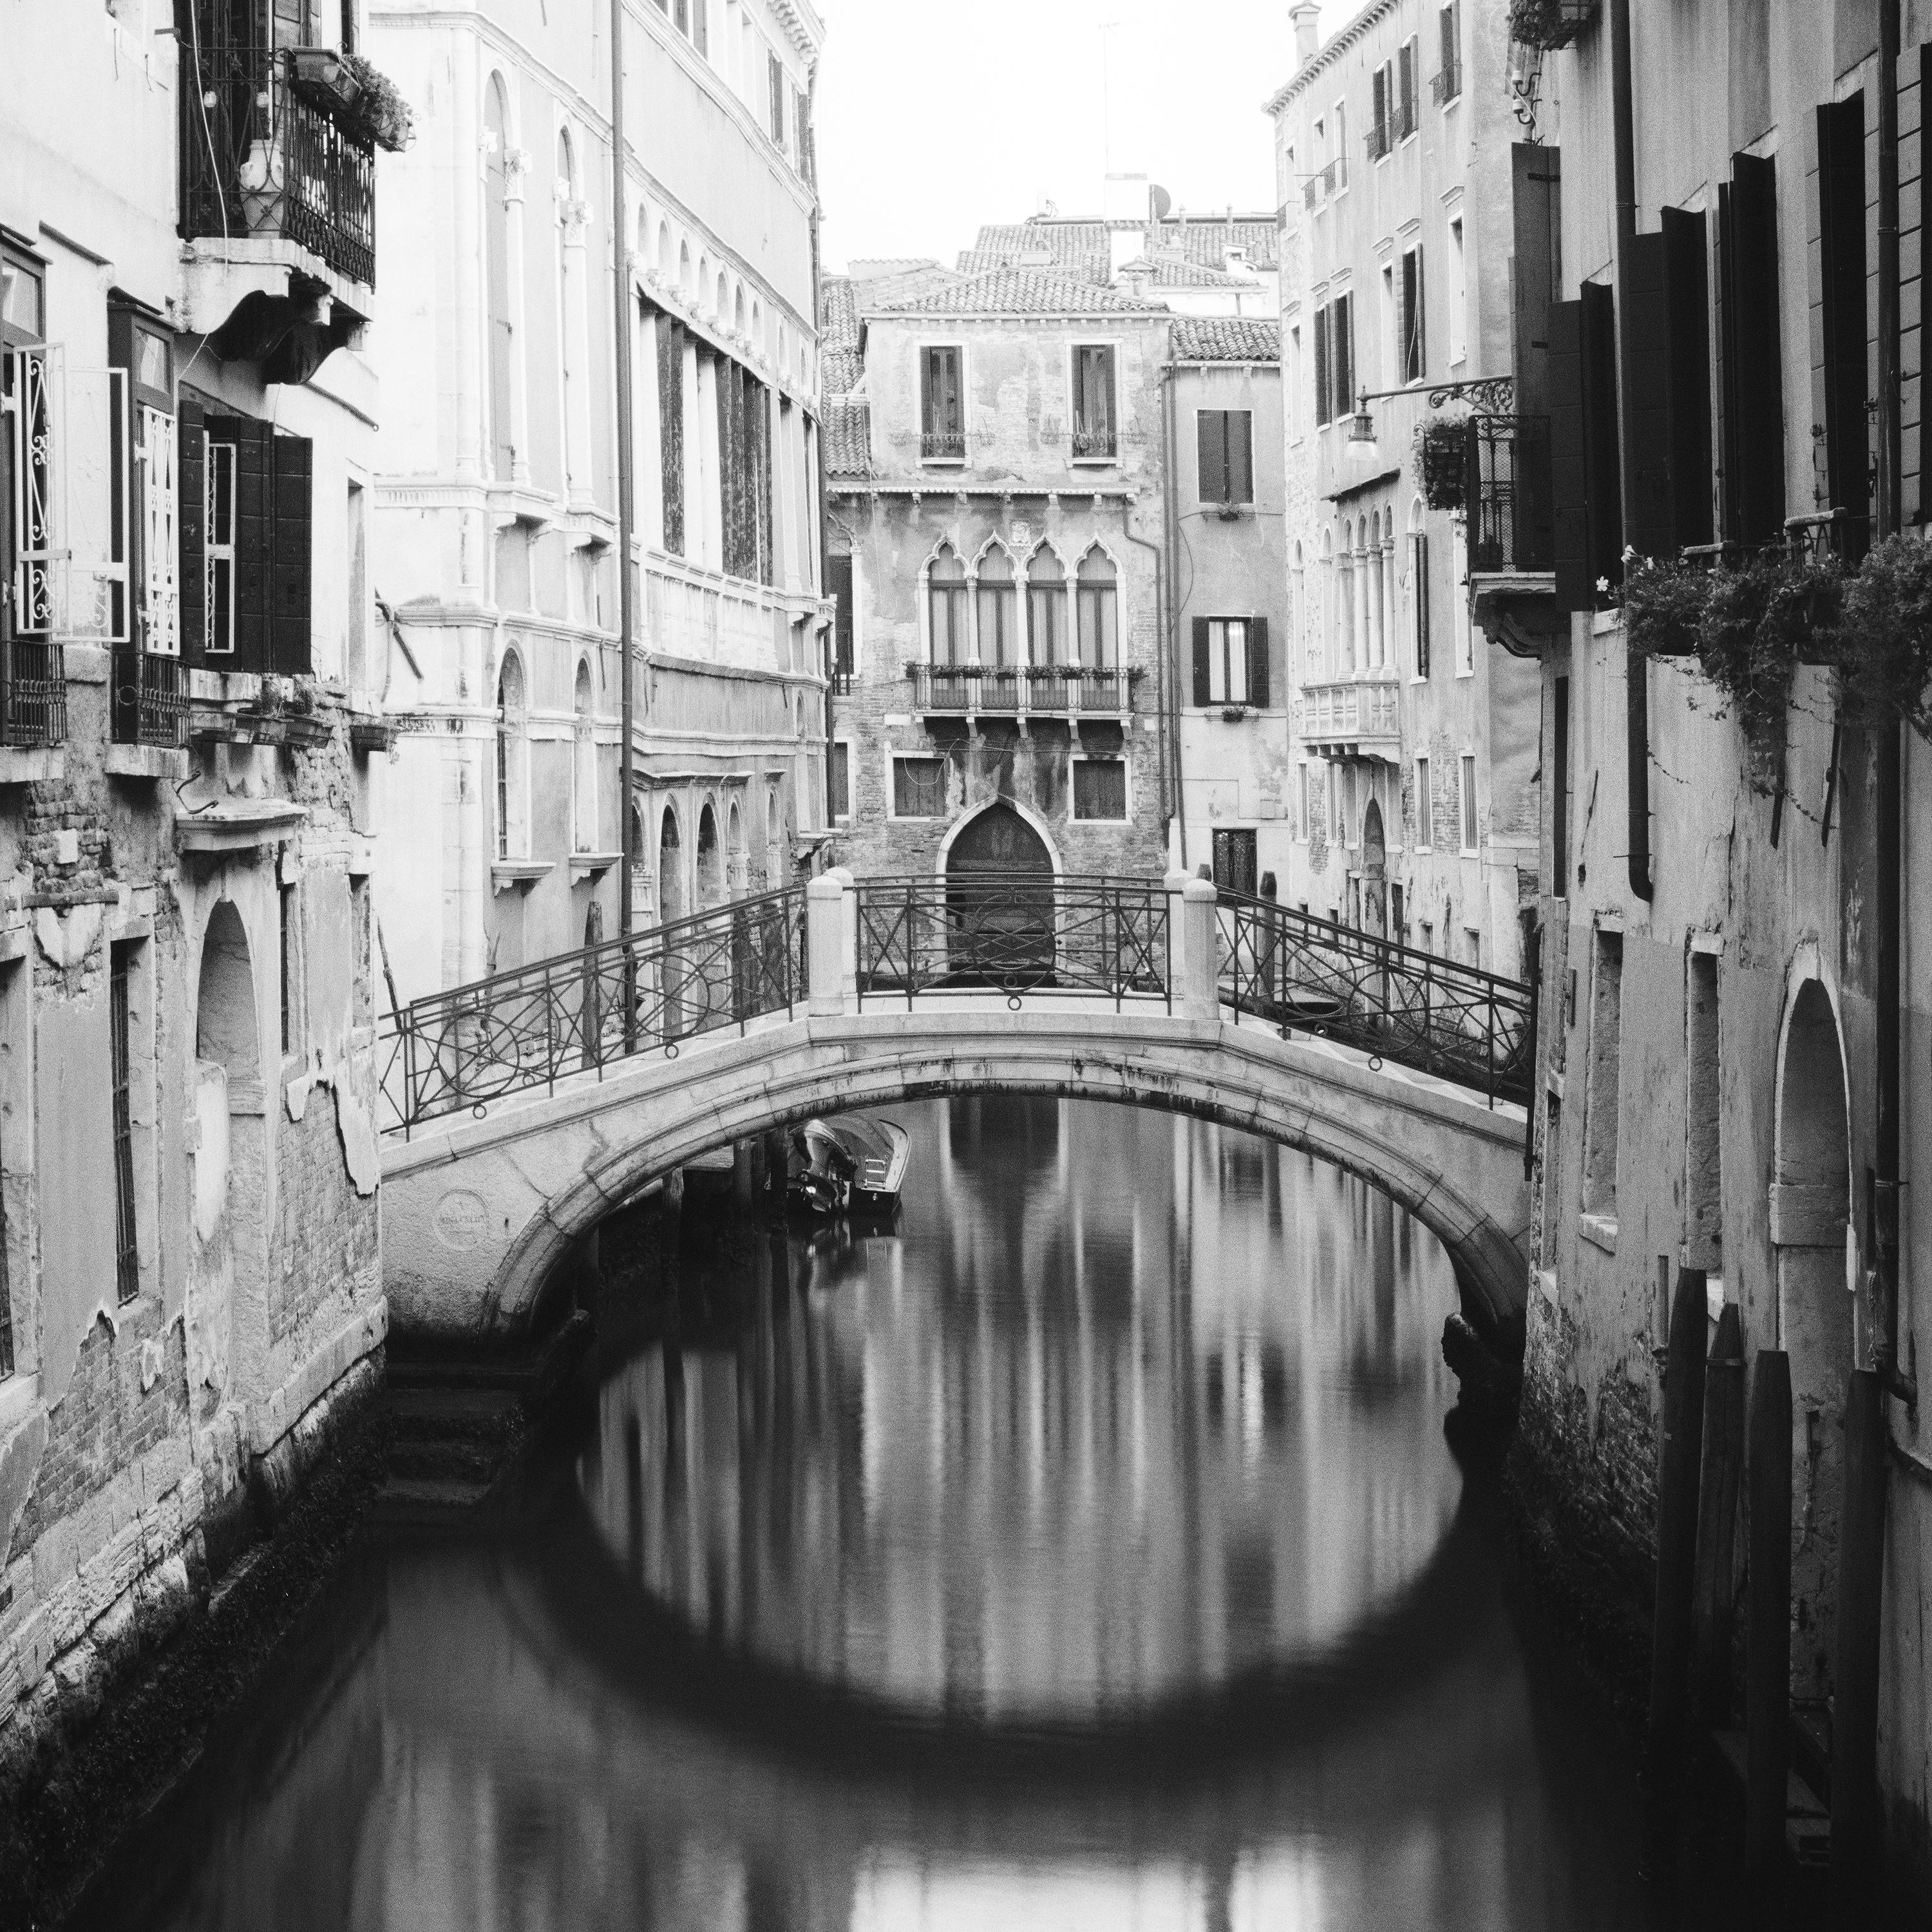 Black and White Fine Art landscape photography. Bridge on a quiet morning in a small canal in Venice, Italy. Archival pigment ink print, edition of 9. Signed, titled, dated and numbered by artist. Certificate of authenticity included. Printed with